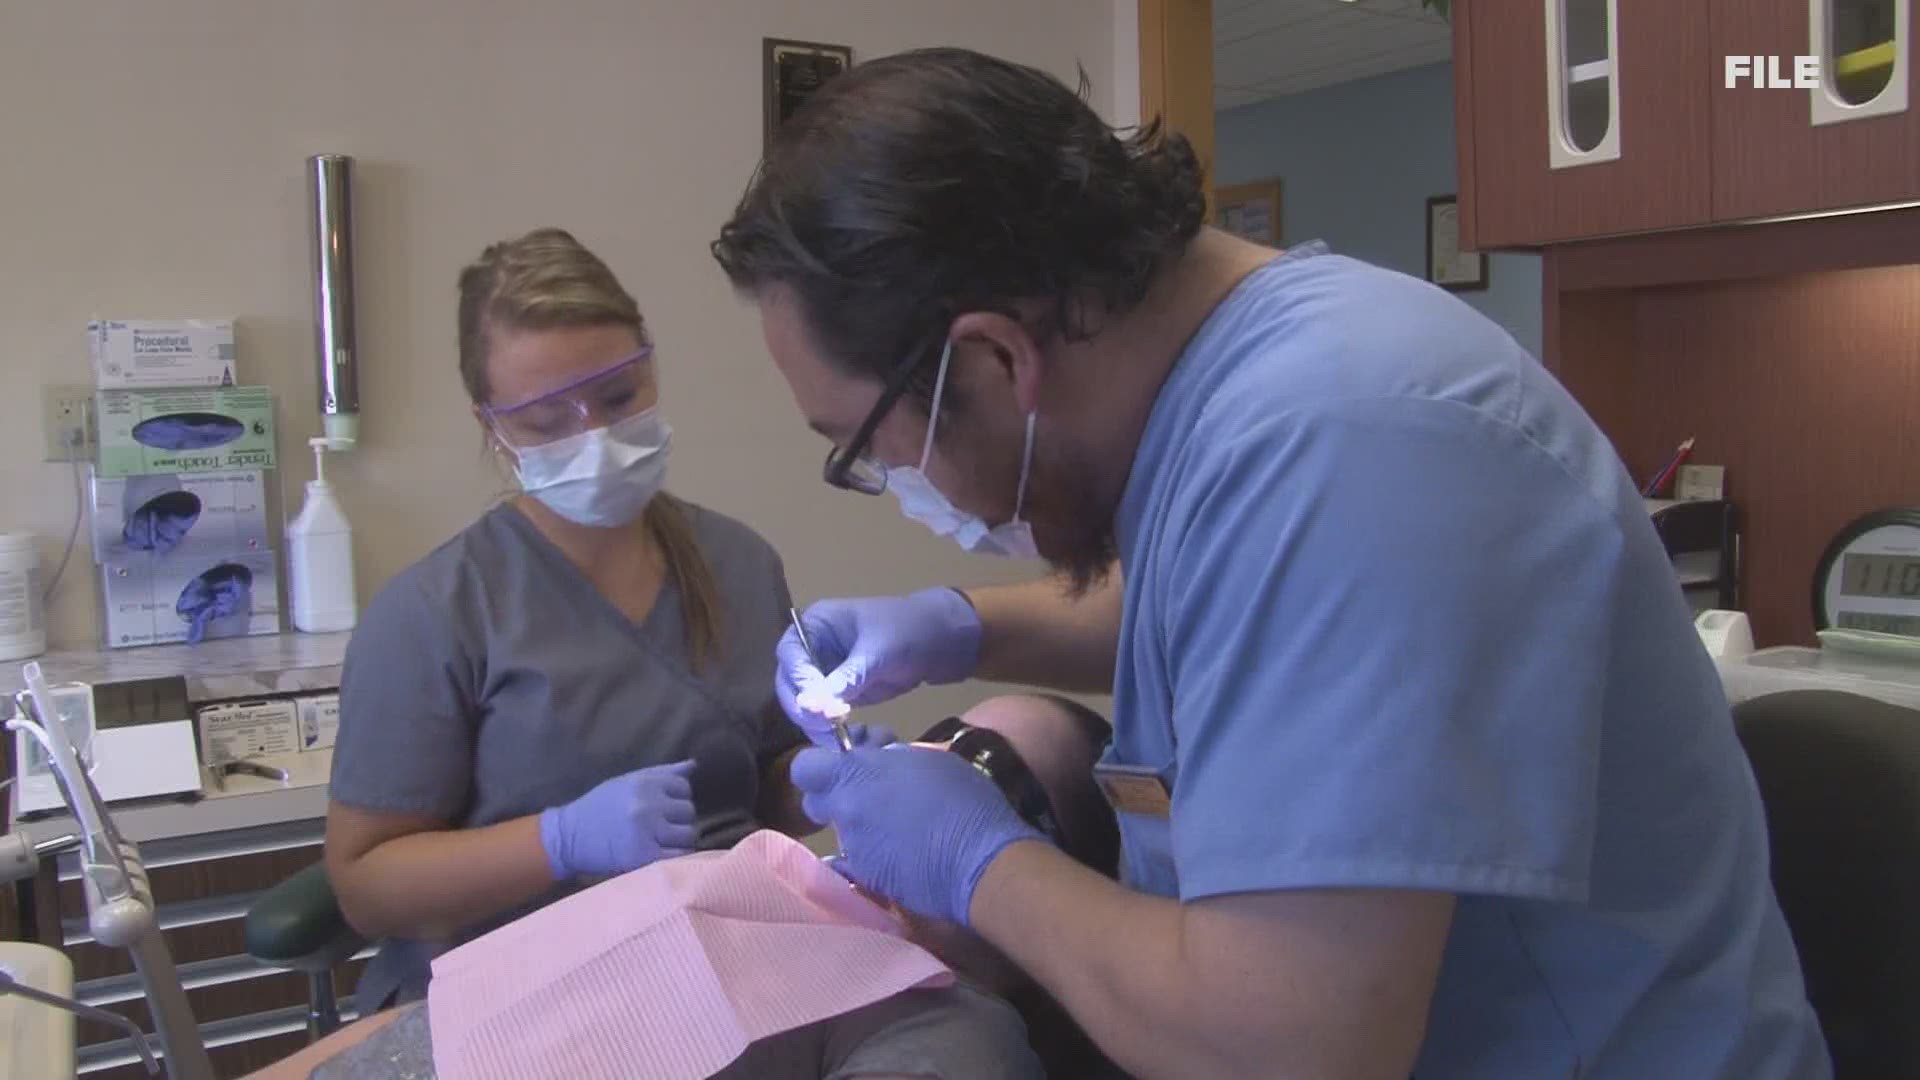 Maine dentists can still only provide emergency care during the coronavirus pandemic